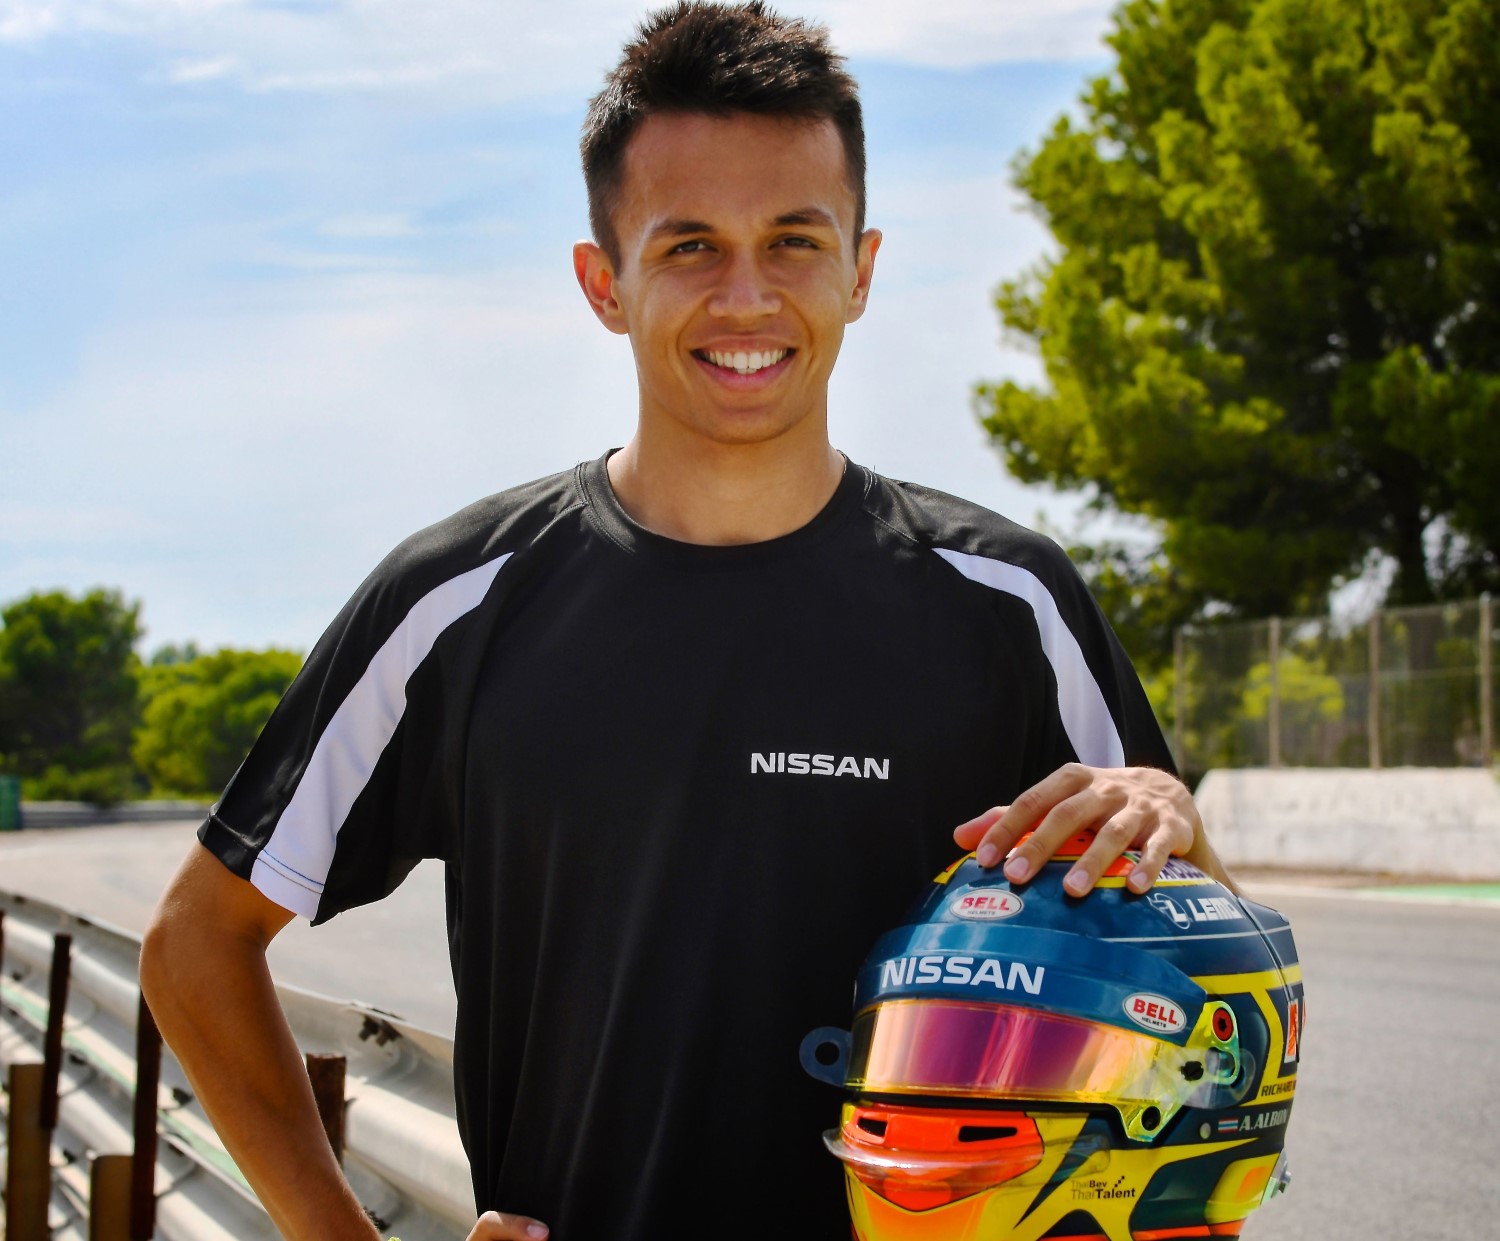 Albon knows getting into F1 is impossible so Formula E it is